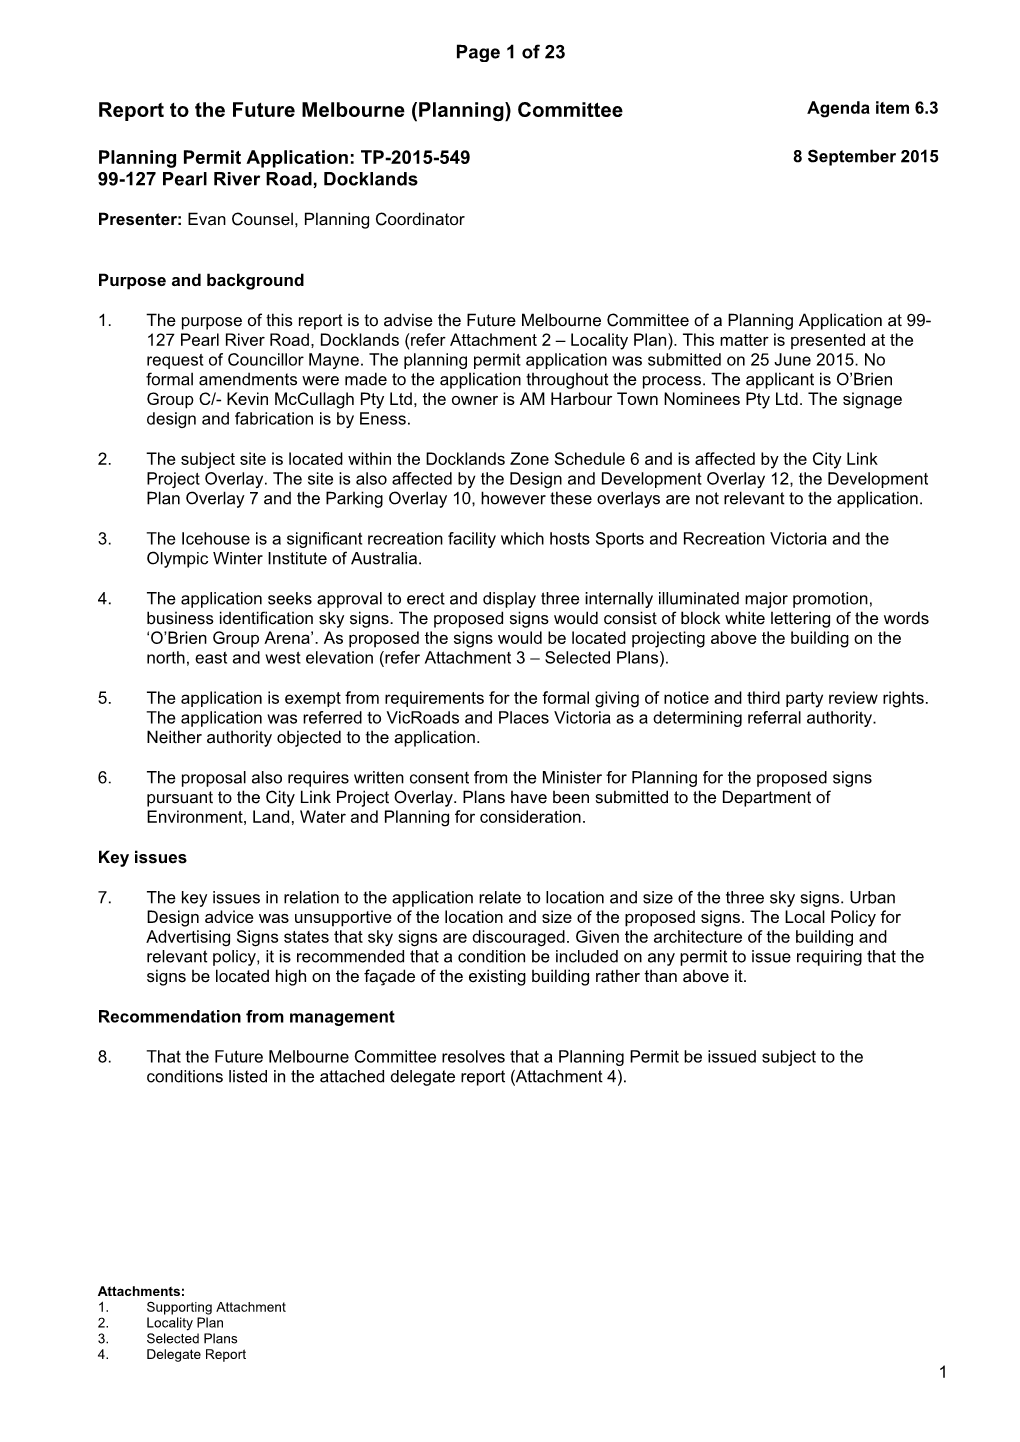 Report to the Future Melbourne (Planning) Committee Agenda Item 6.3